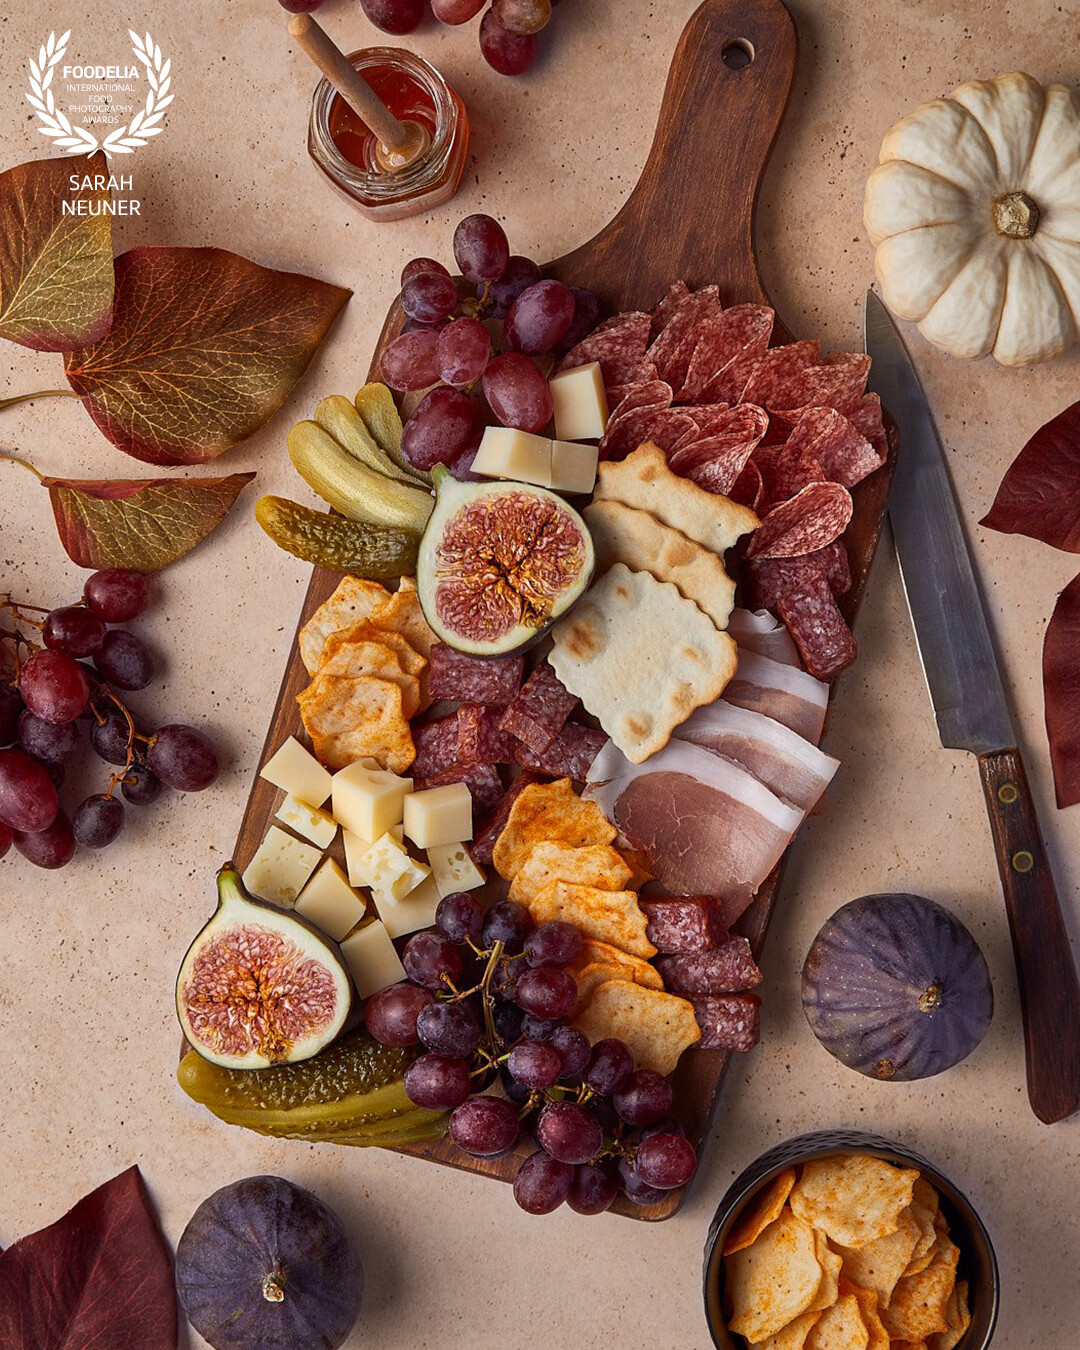 Autumn charcuterie board showcasing a selection of meats and cheeses from local producers in Tirol, Austria.